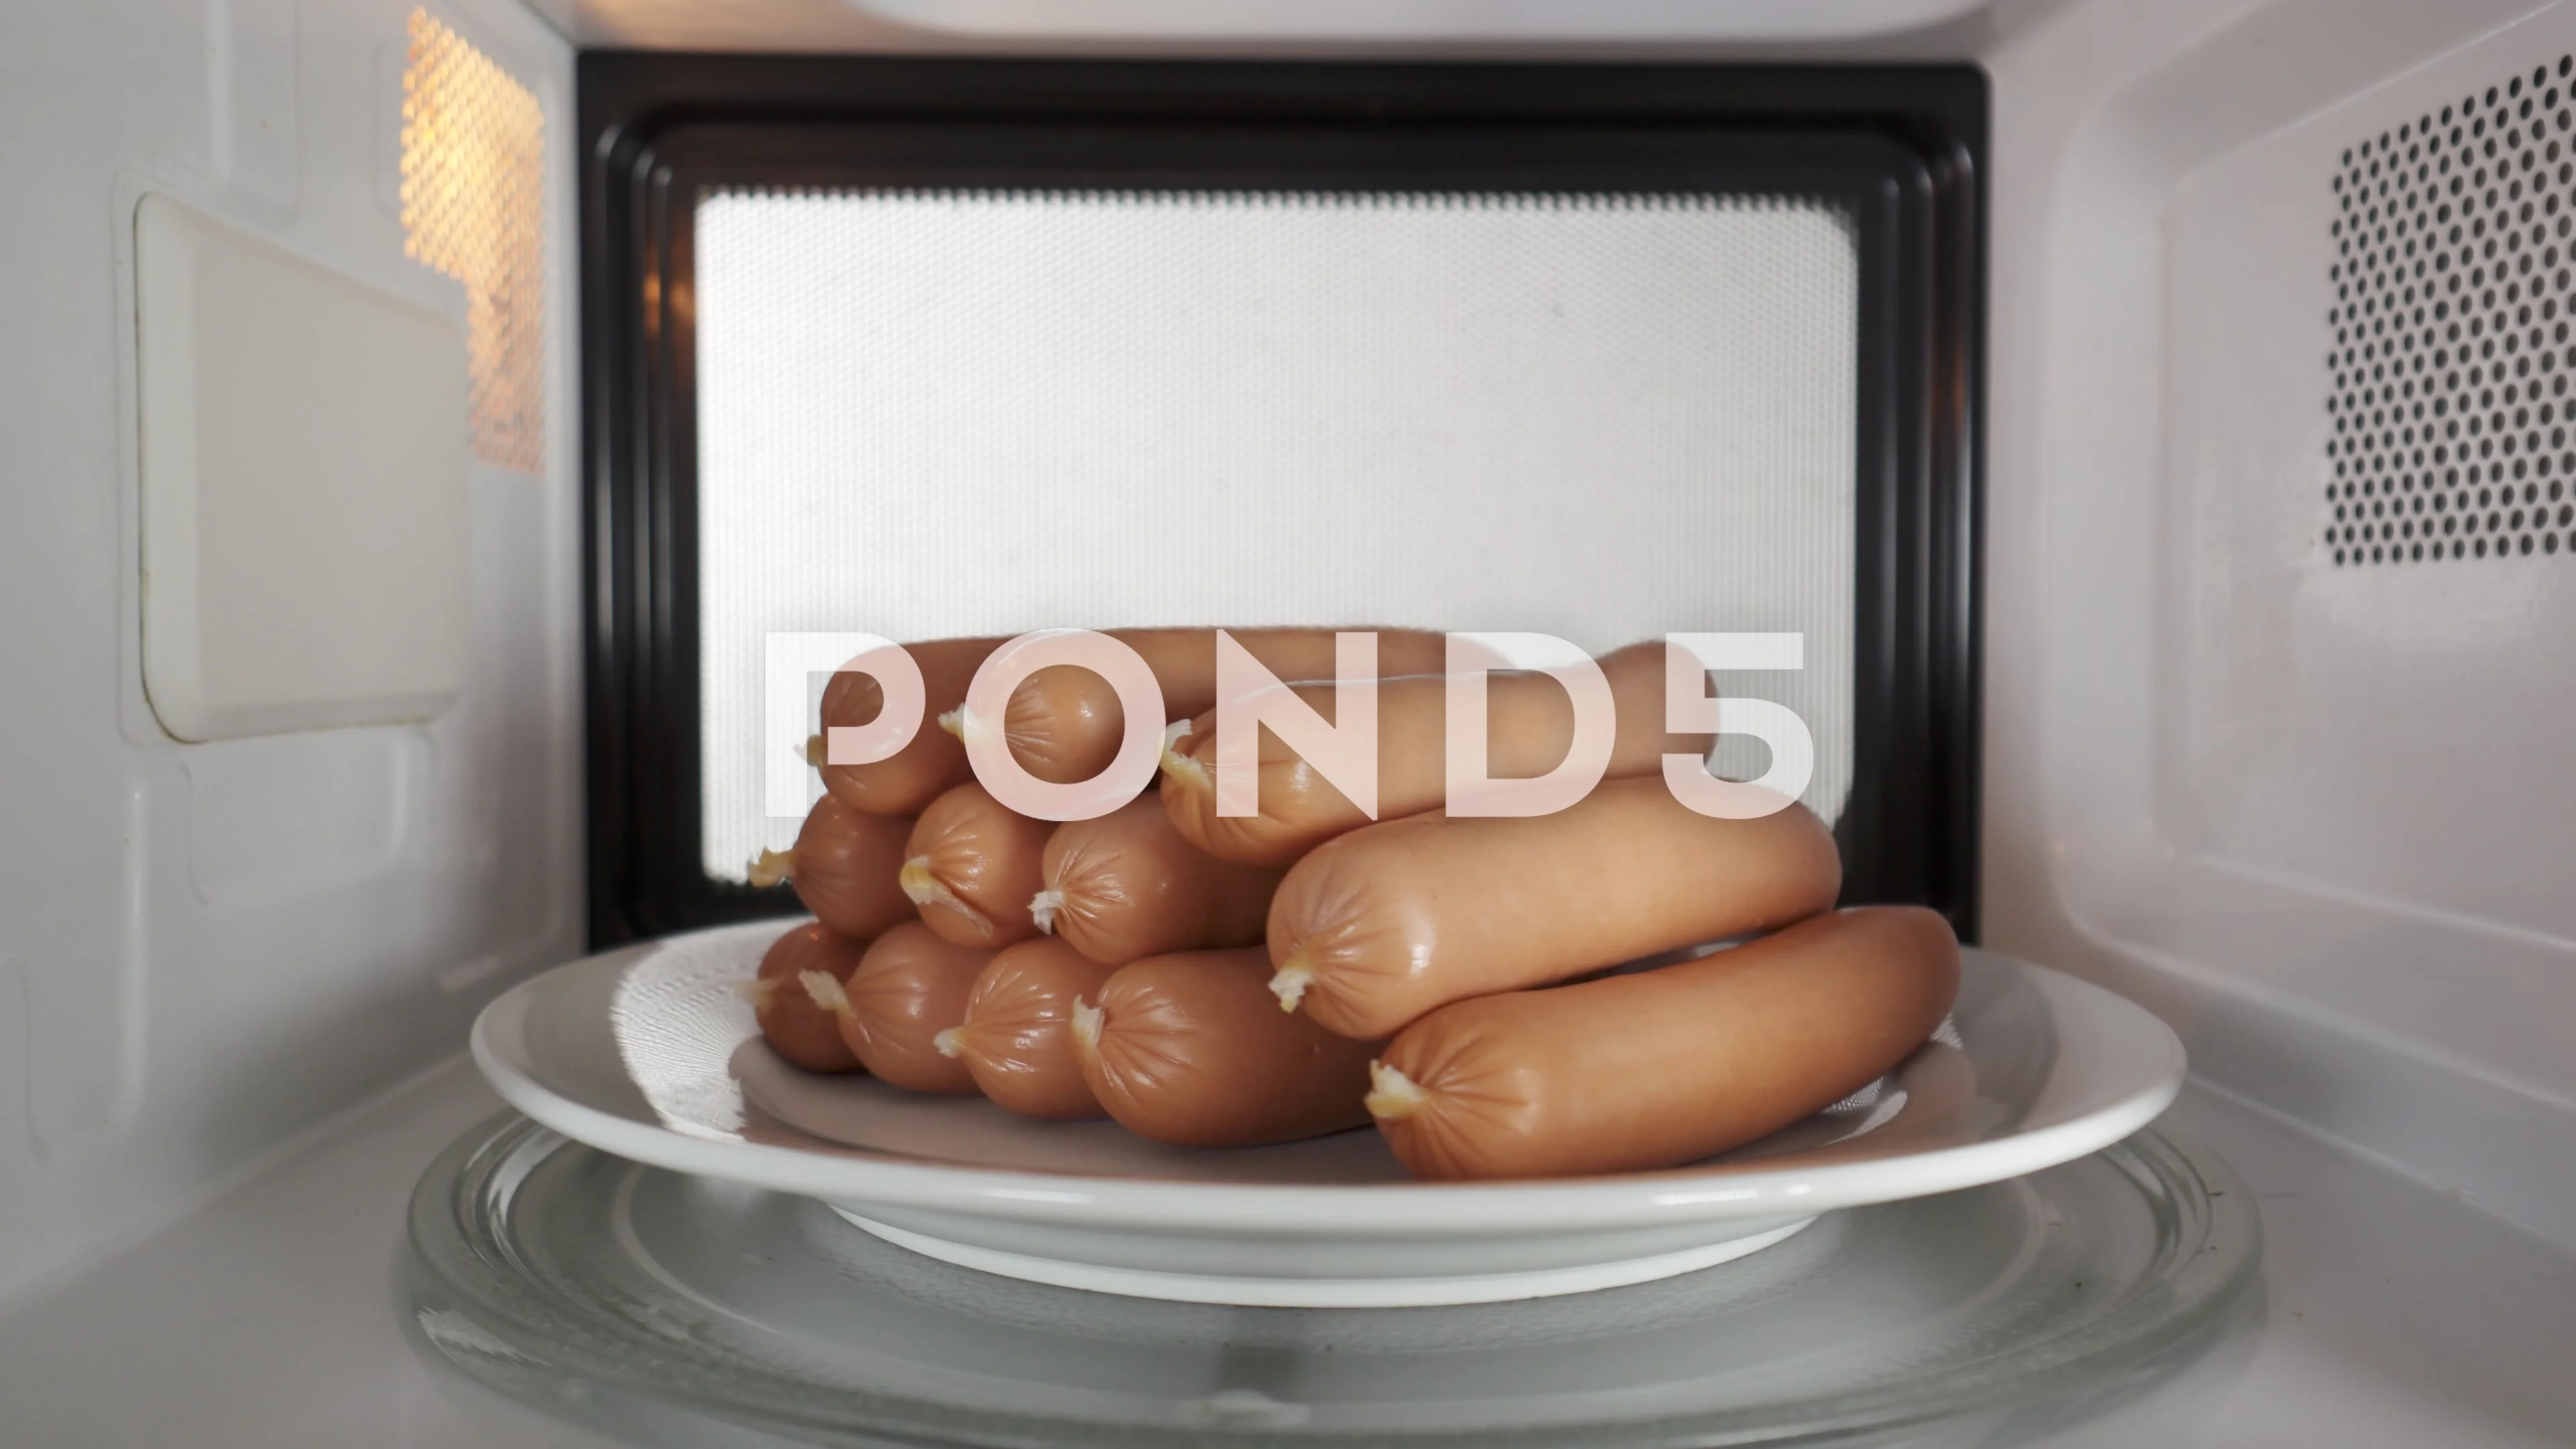 Cook Sausages in a Microwave Oven - Food Cheats